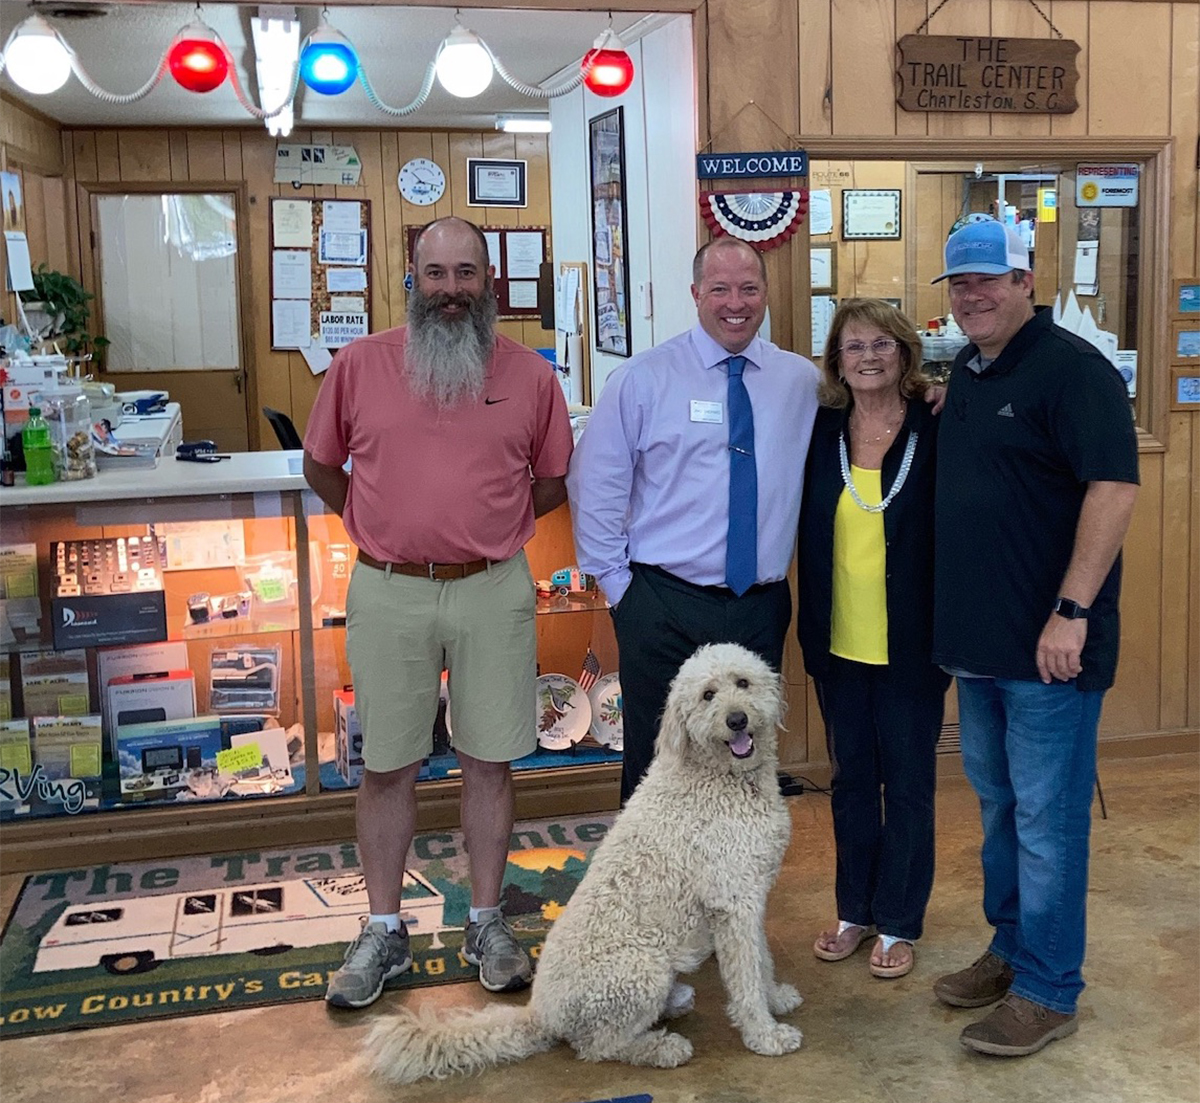 Pete‰ŰŞs RV owners Todd McGinnis and Chad Shepard join Gloria and Jay Morgan, owners of The Trail Center, and their dog Murphy in North Charleston. (Photo/Provided)